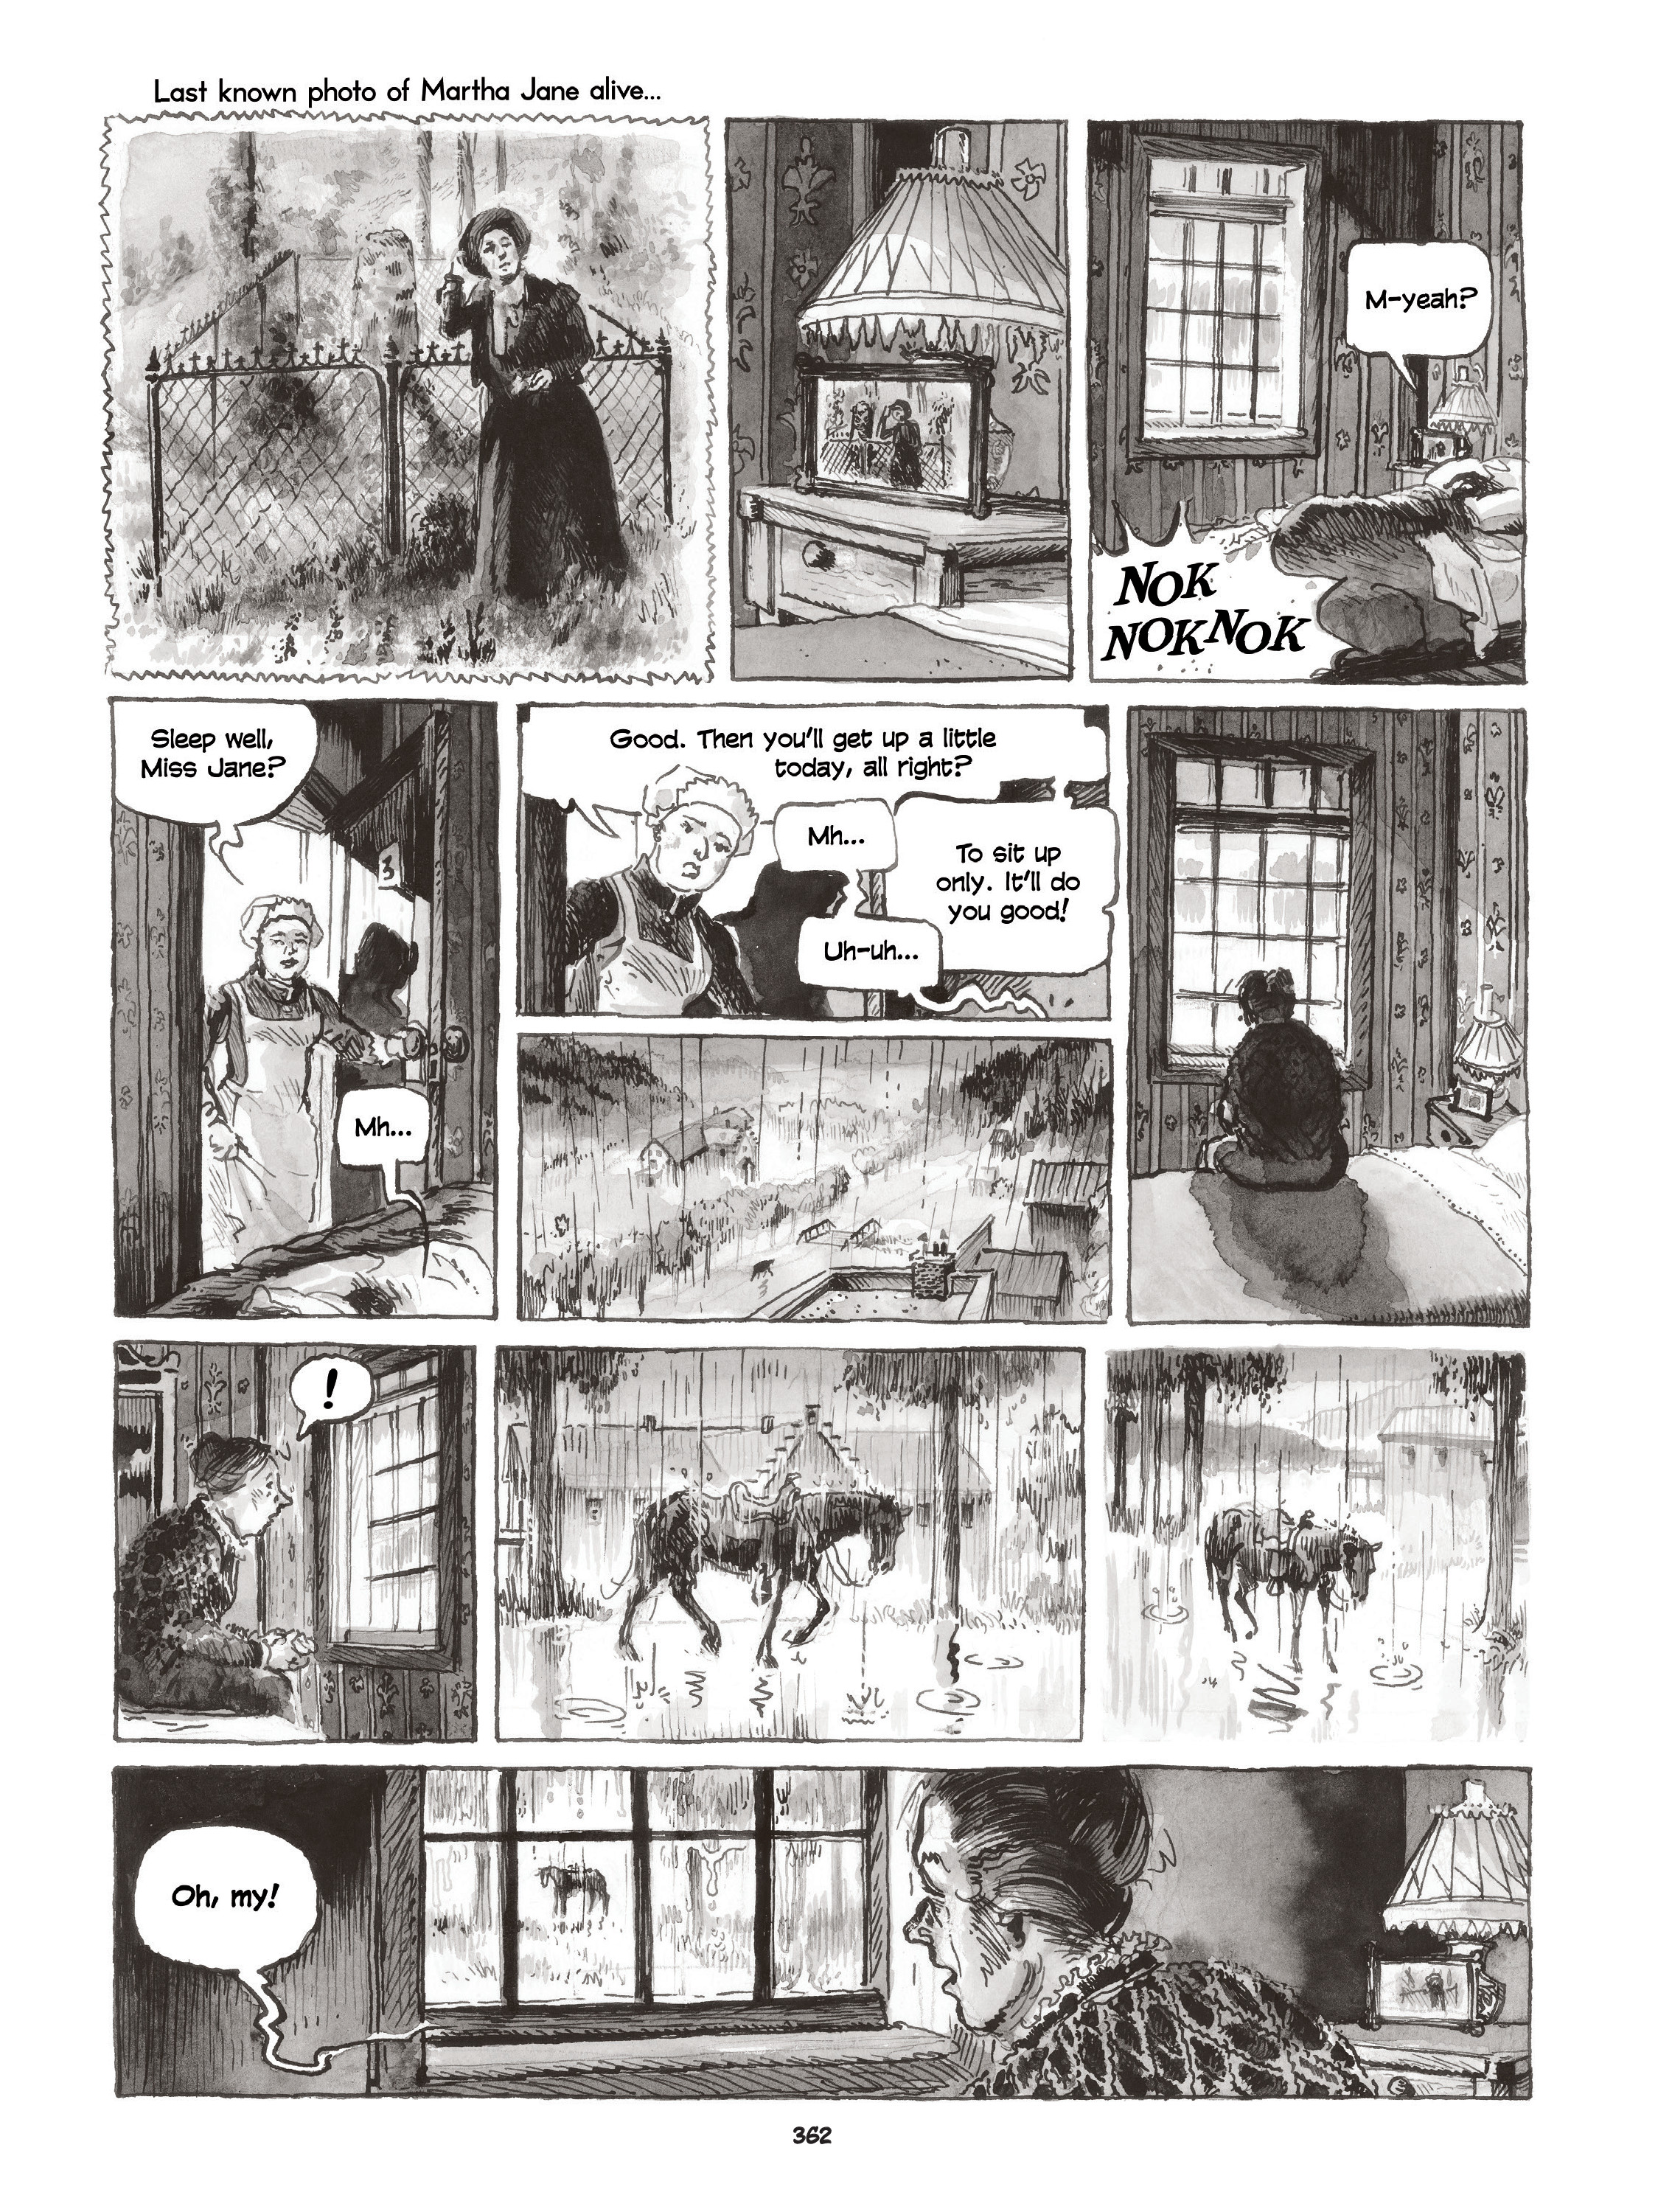 Read online Calamity Jane: The Calamitous Life of Martha Jane Cannary comic -  Issue # TPB (Part 4) - 62